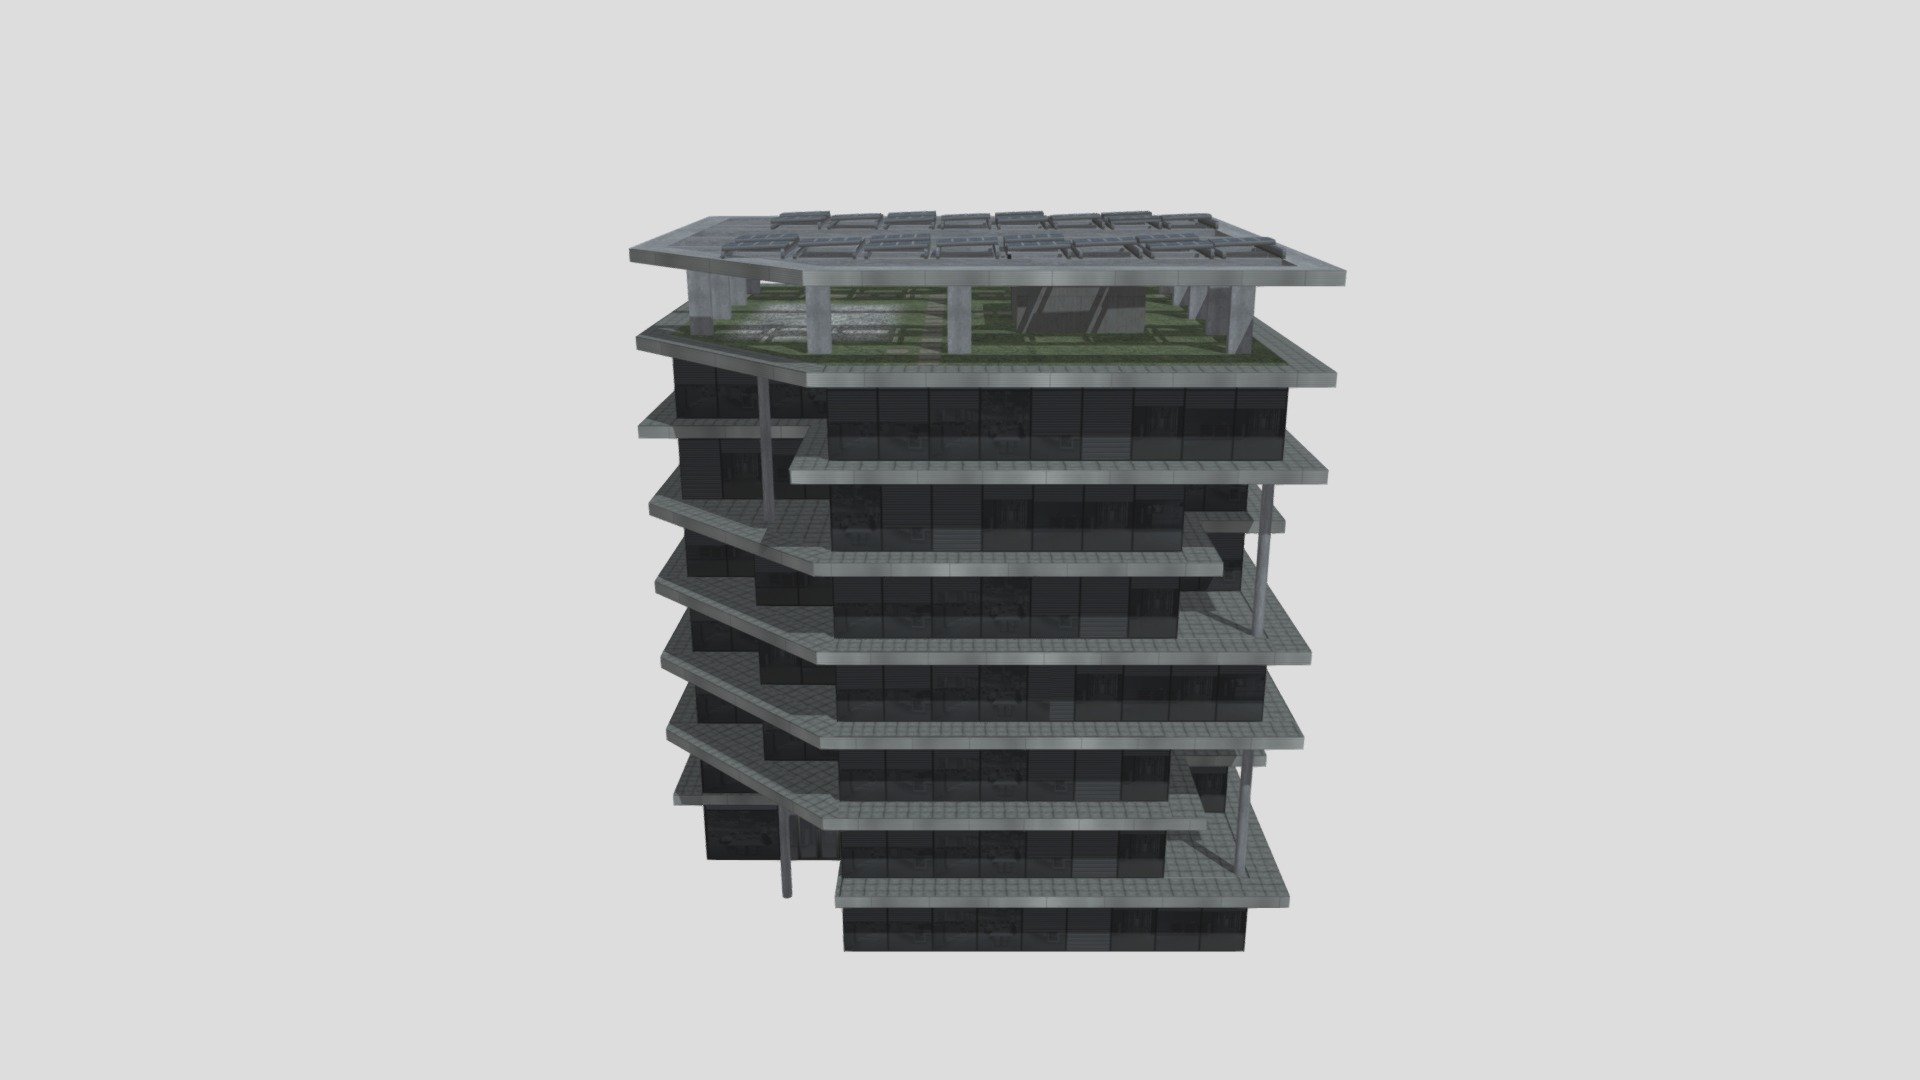 Office building for Cities Skylines game. It's based on a real world office building built in Barcelona, Spain 3d model